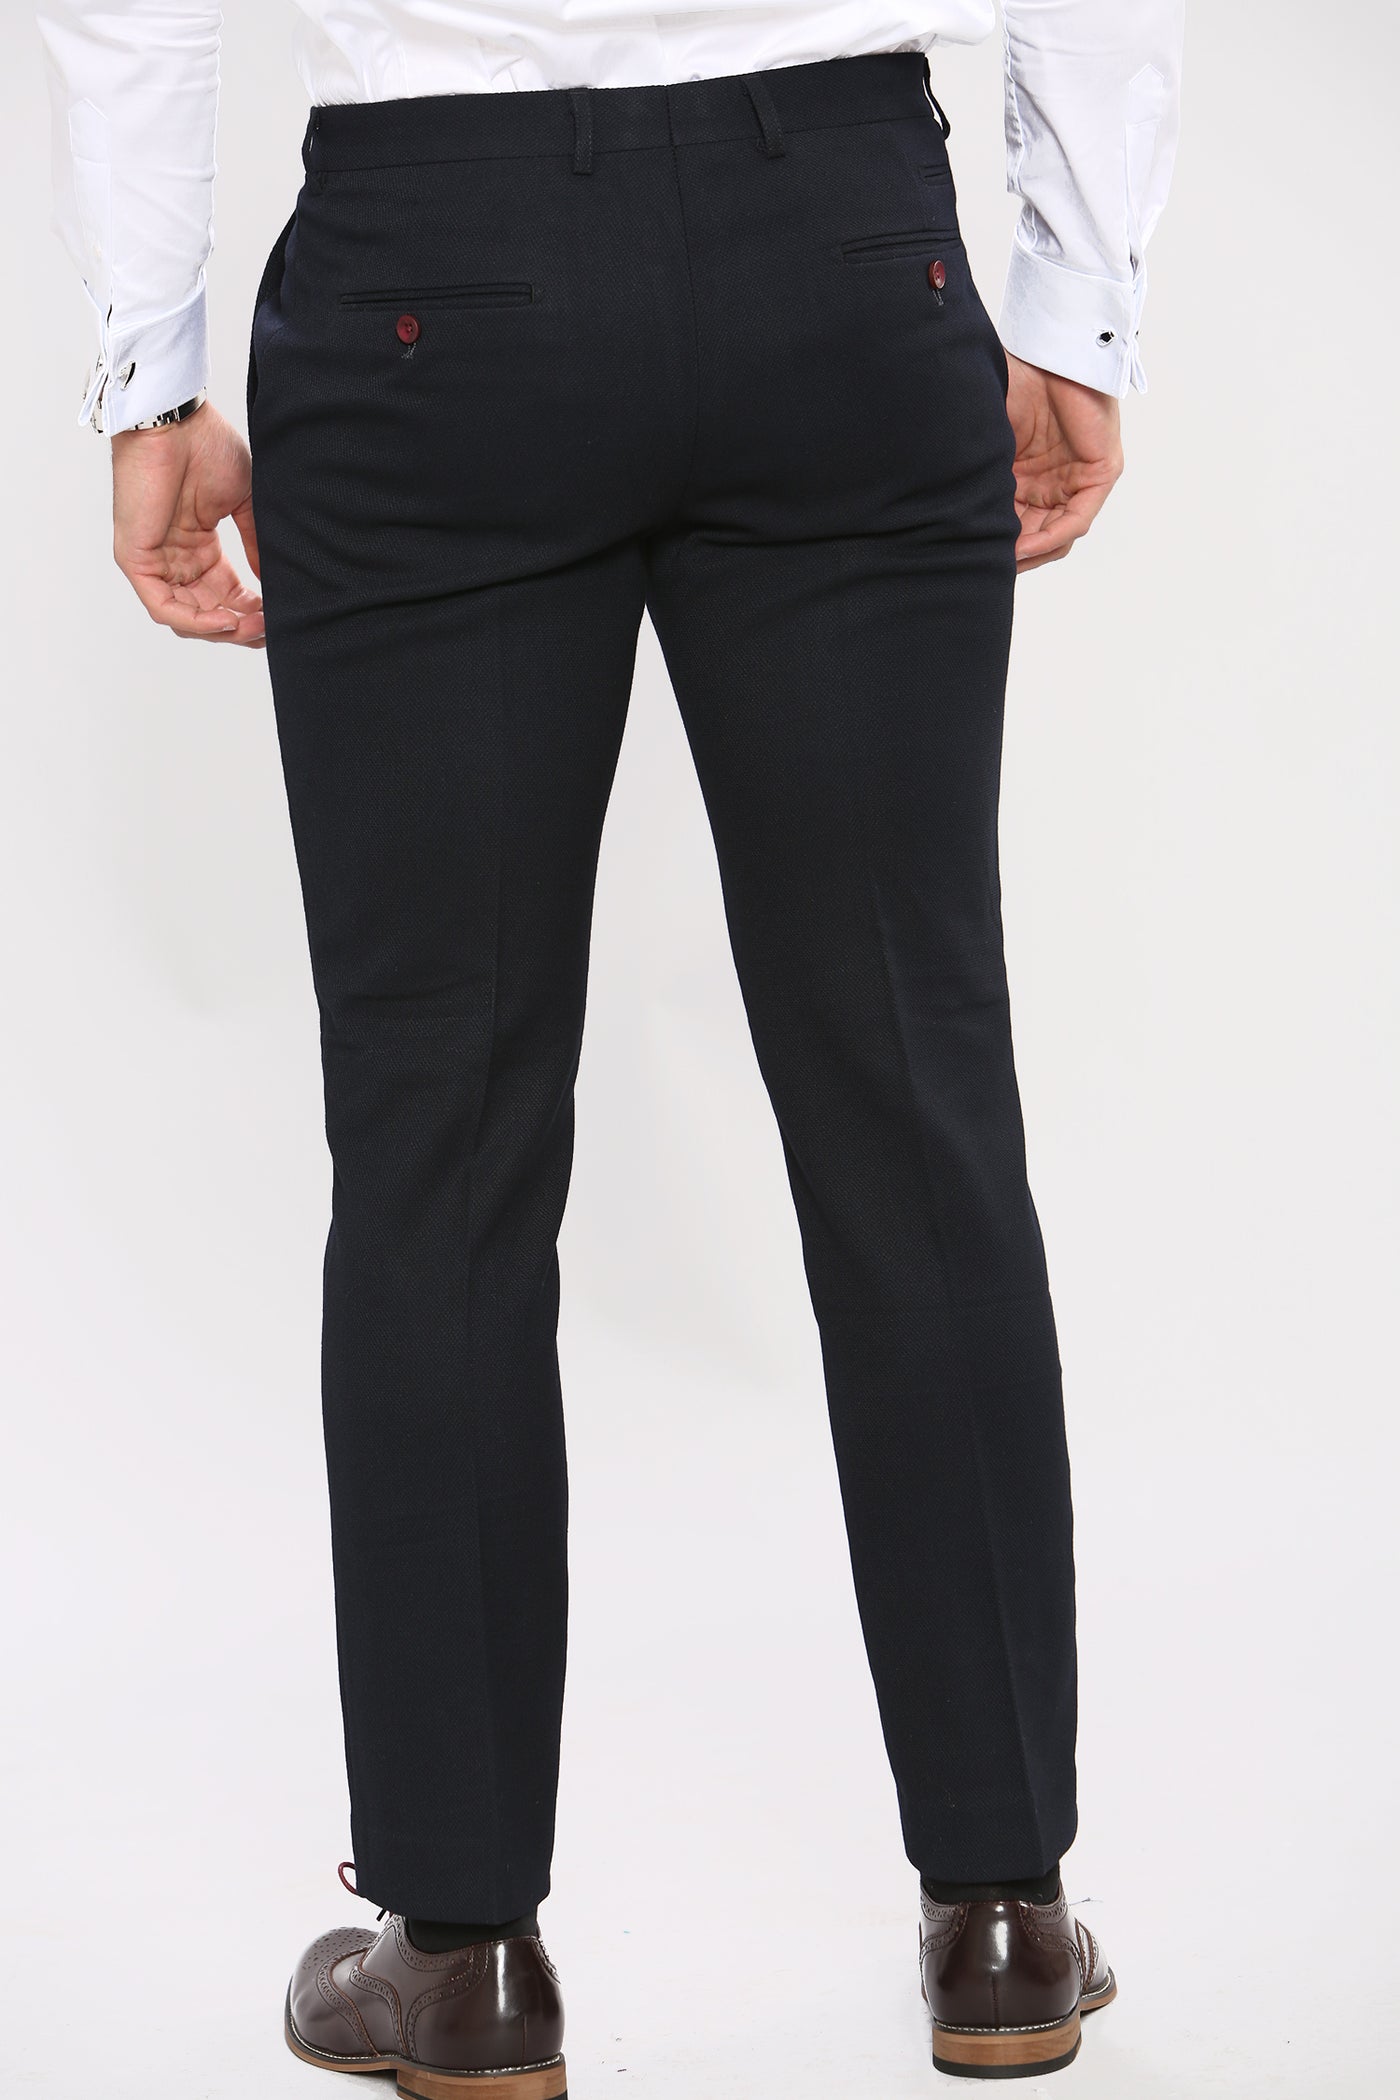 JD4 - Navy Flat Front Trousers